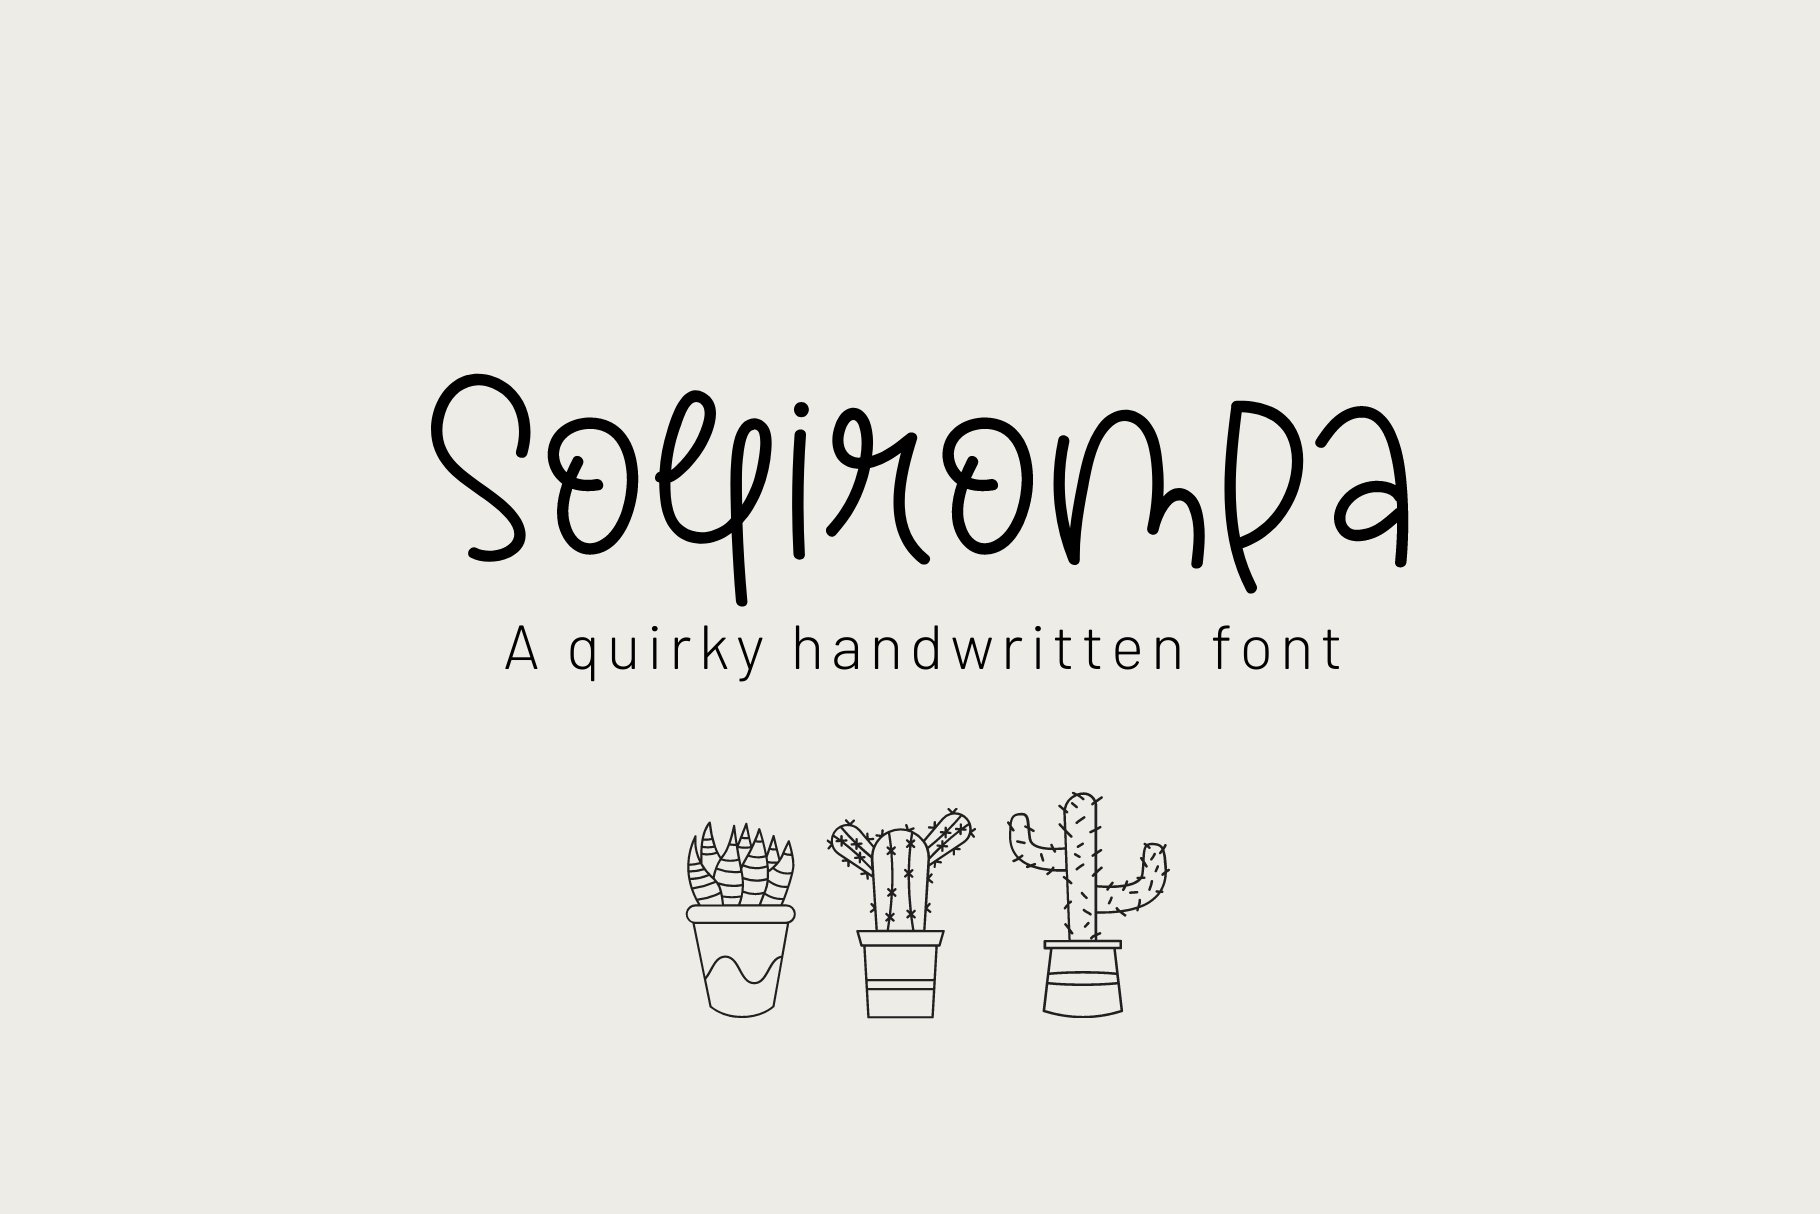 Sollirompa Quirky Font cover image.